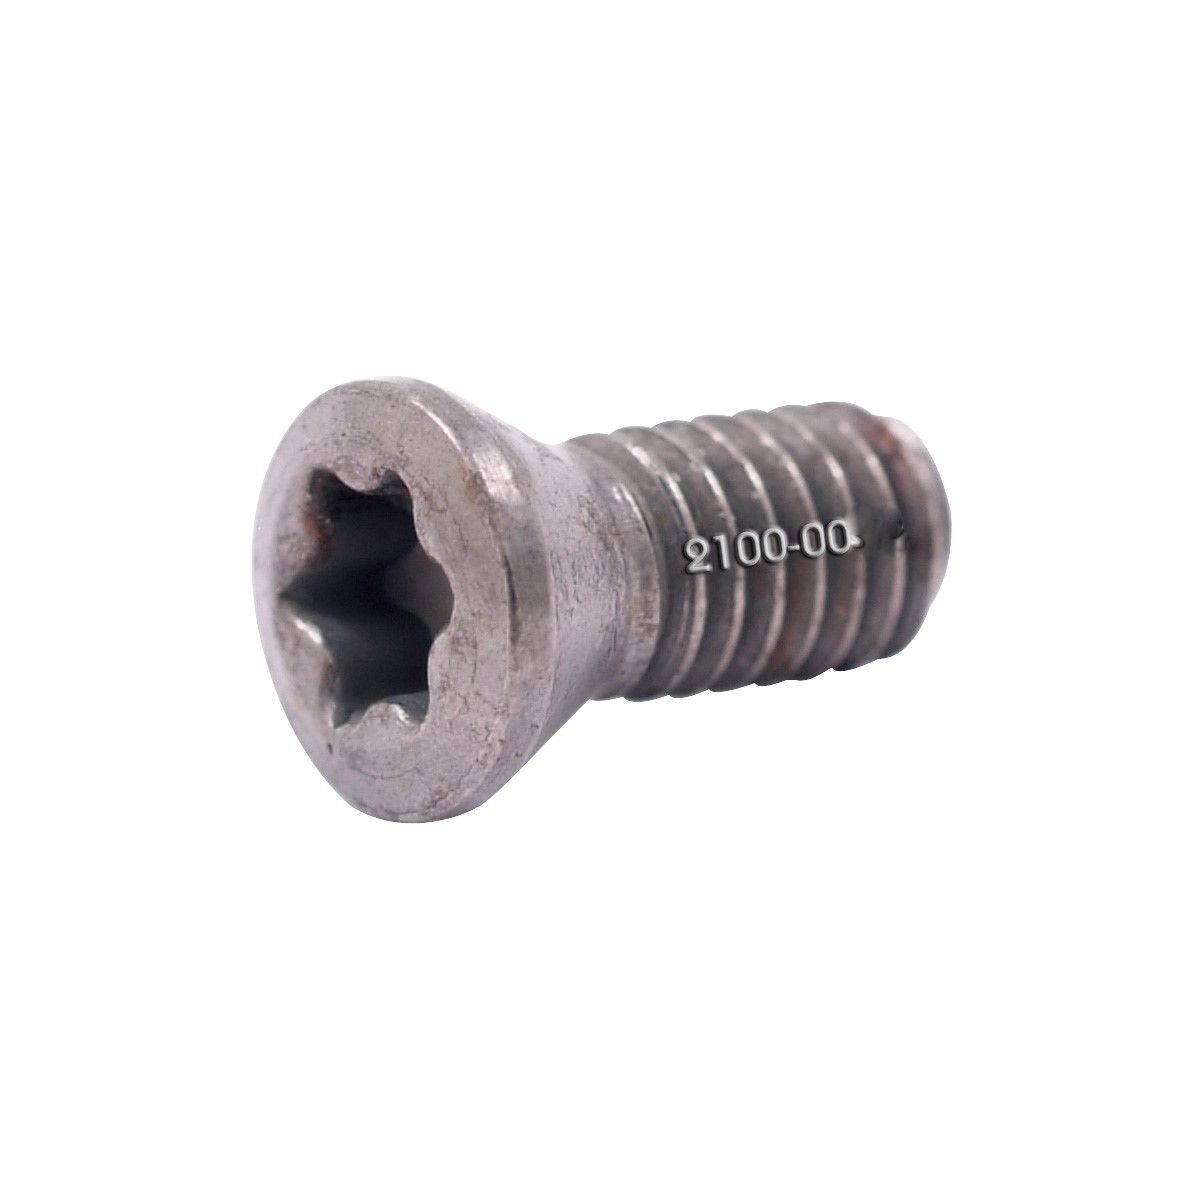 M3.5 X 8MM OVERALL LENGTH SCREW (2100-0073)